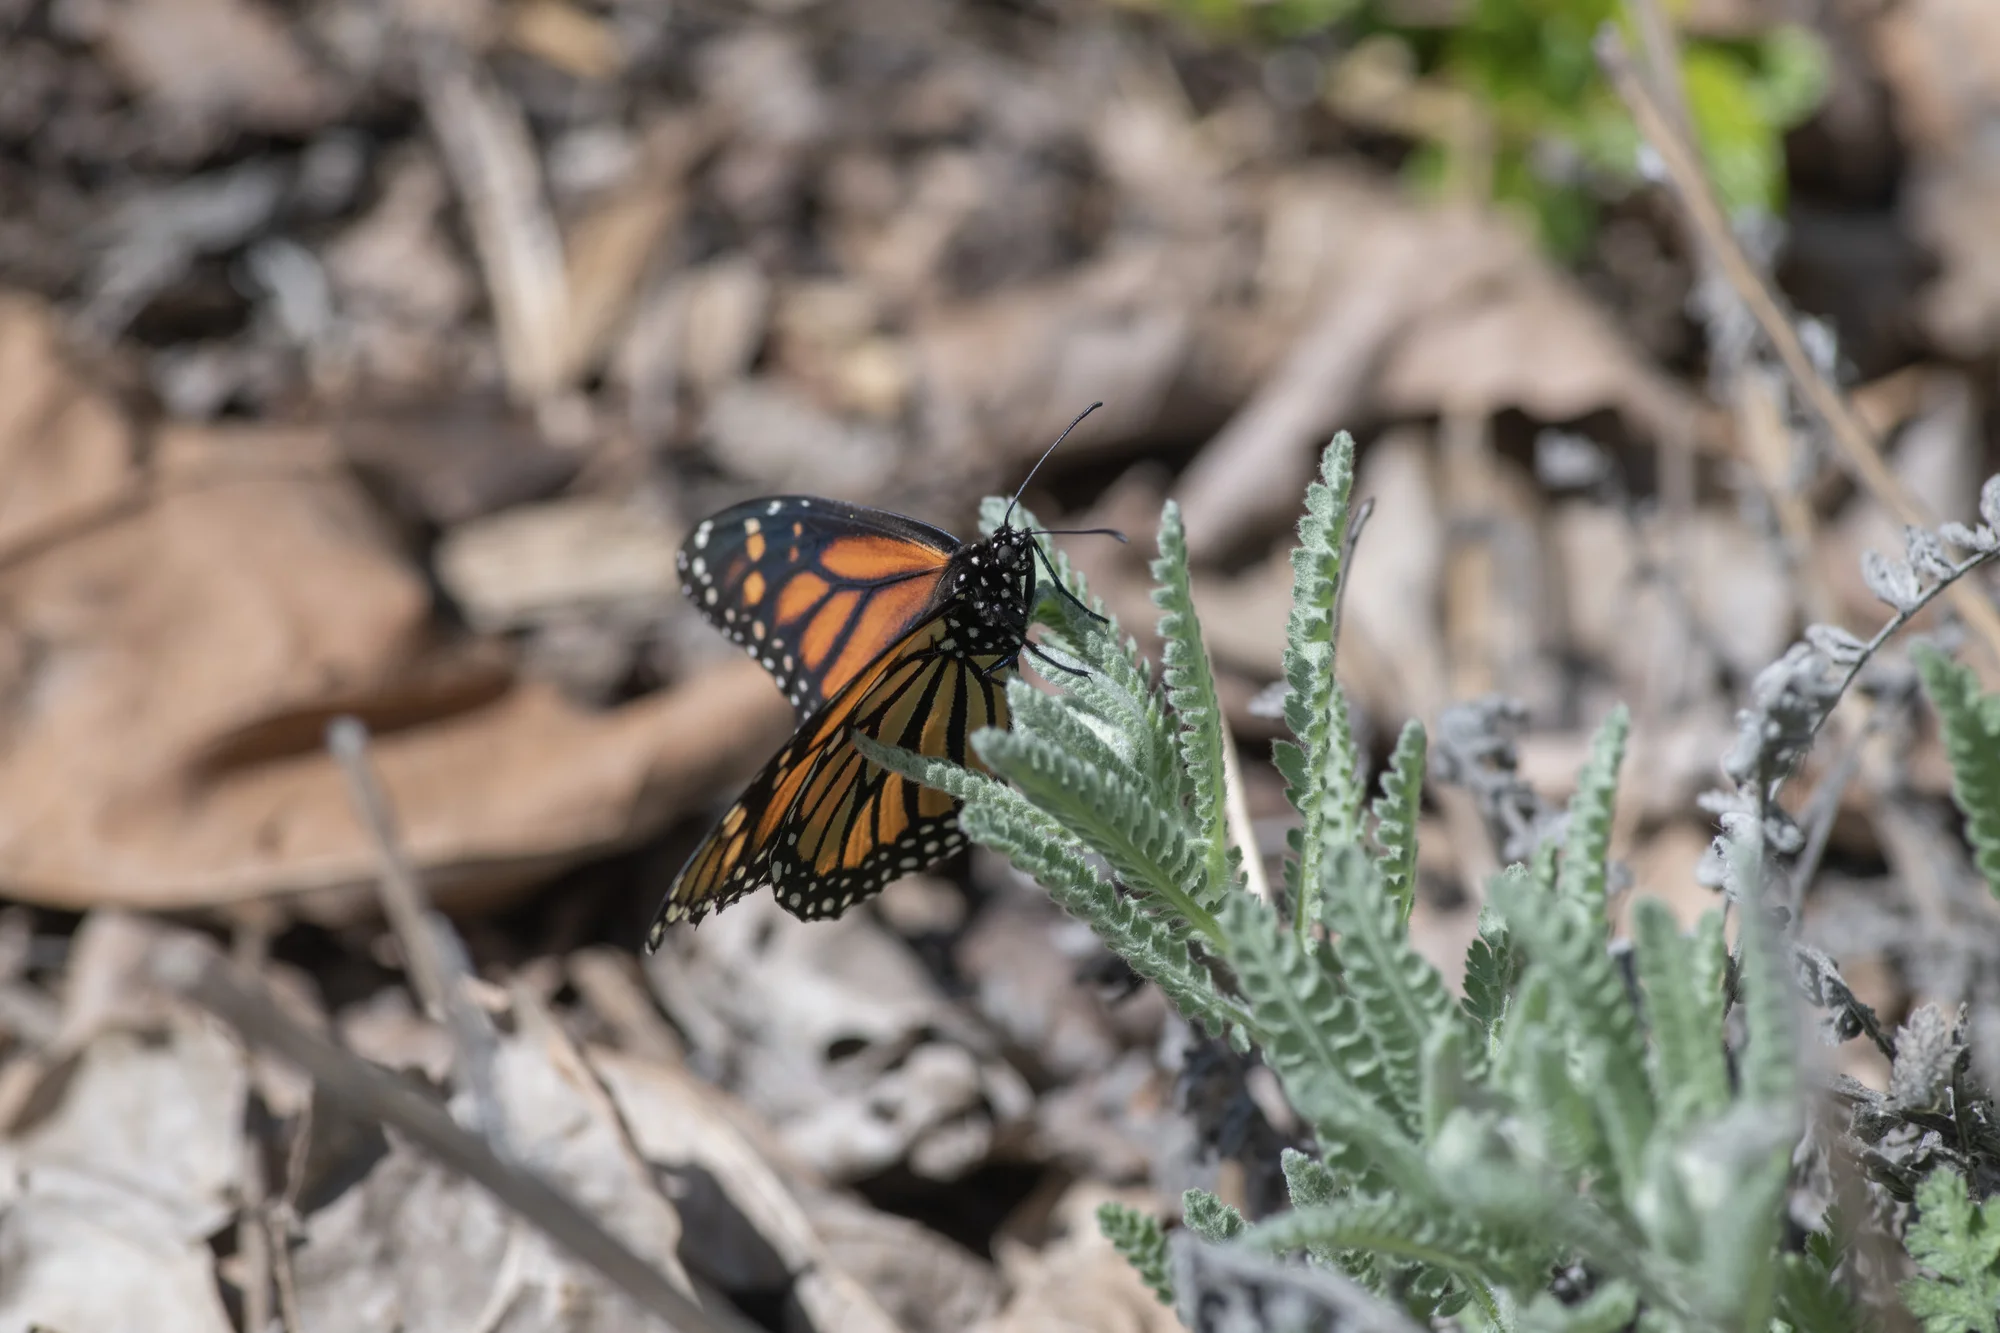 An orange and black butterfly sits on a spiky green plant.